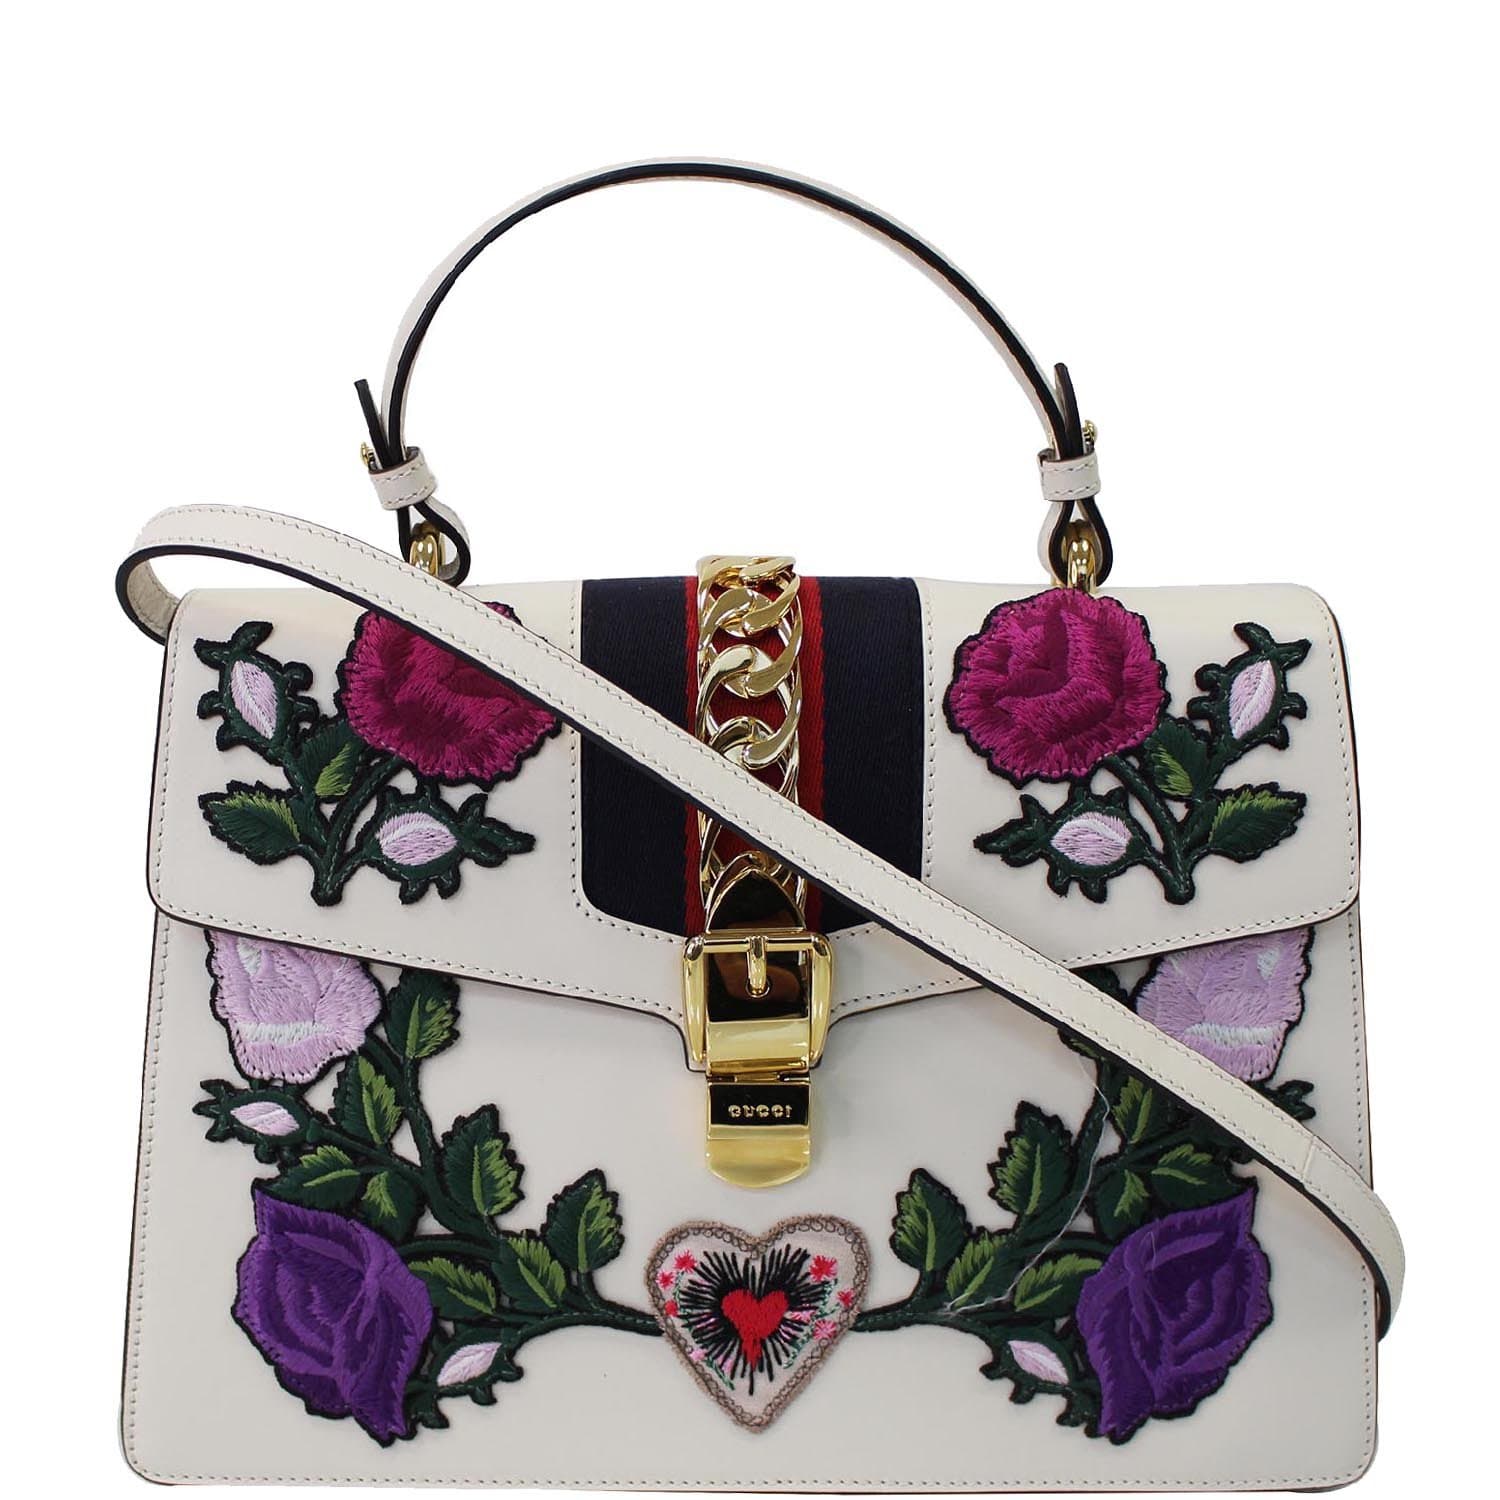 GUCCI Sylvie Embroidered Leather Medium Top Handle Bag White 431665